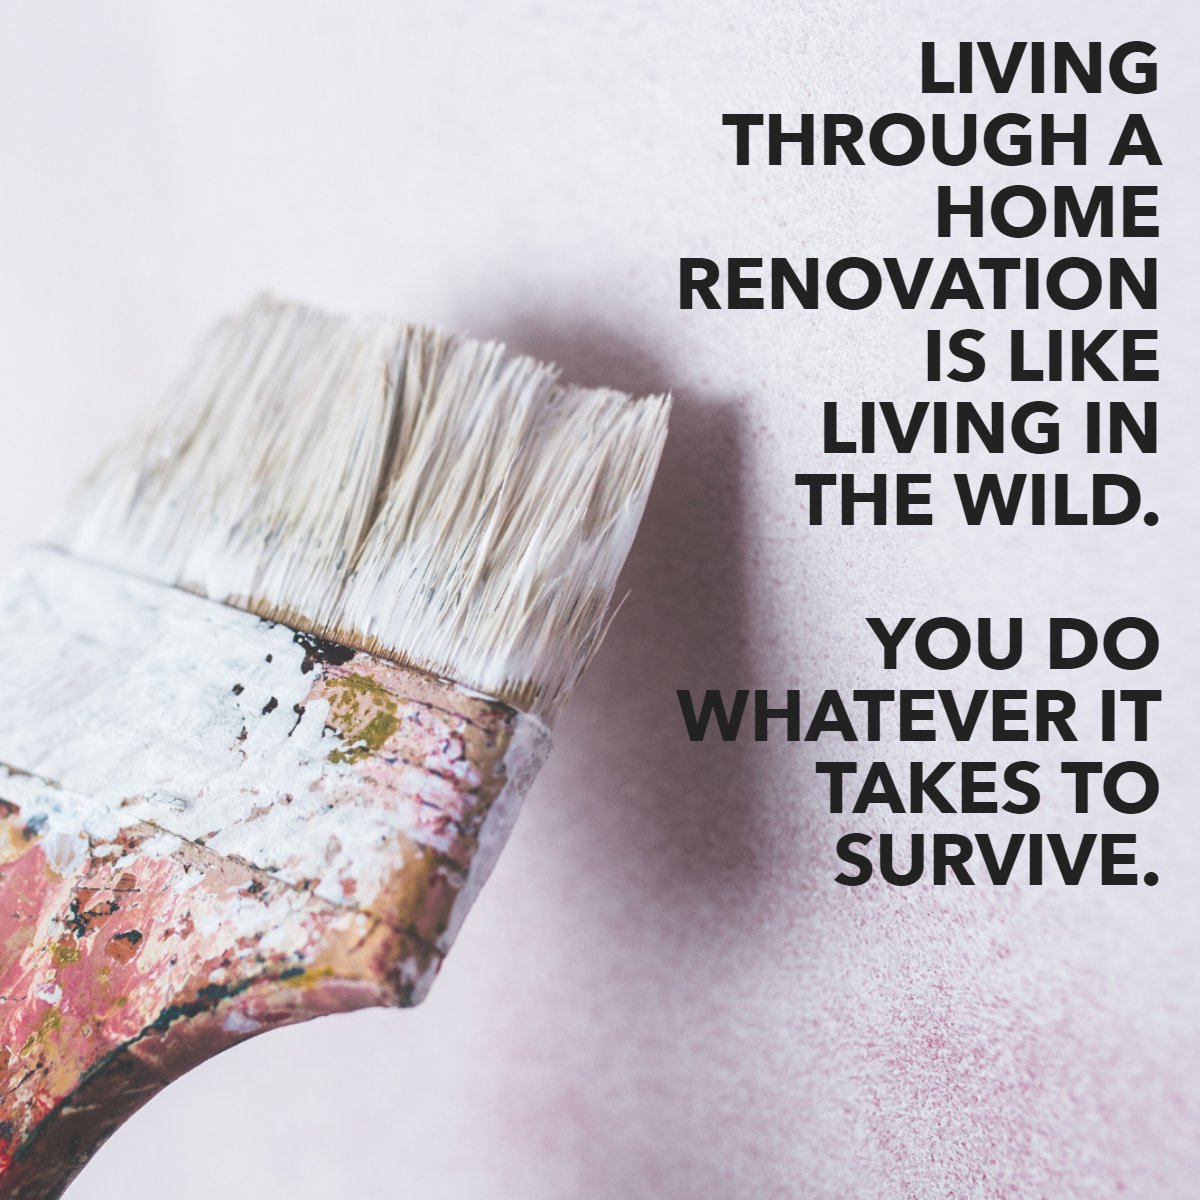 Have you ever lived through a home renovation? 😆

#realestate #homerenovation #homes #homeowner
 #swflrealtor #swflrealestate #floridarealestate #florida #newconstruction #homebuying #homebuyingprocess #homebuyingtips #househunting #fsbo #Teamswflelite